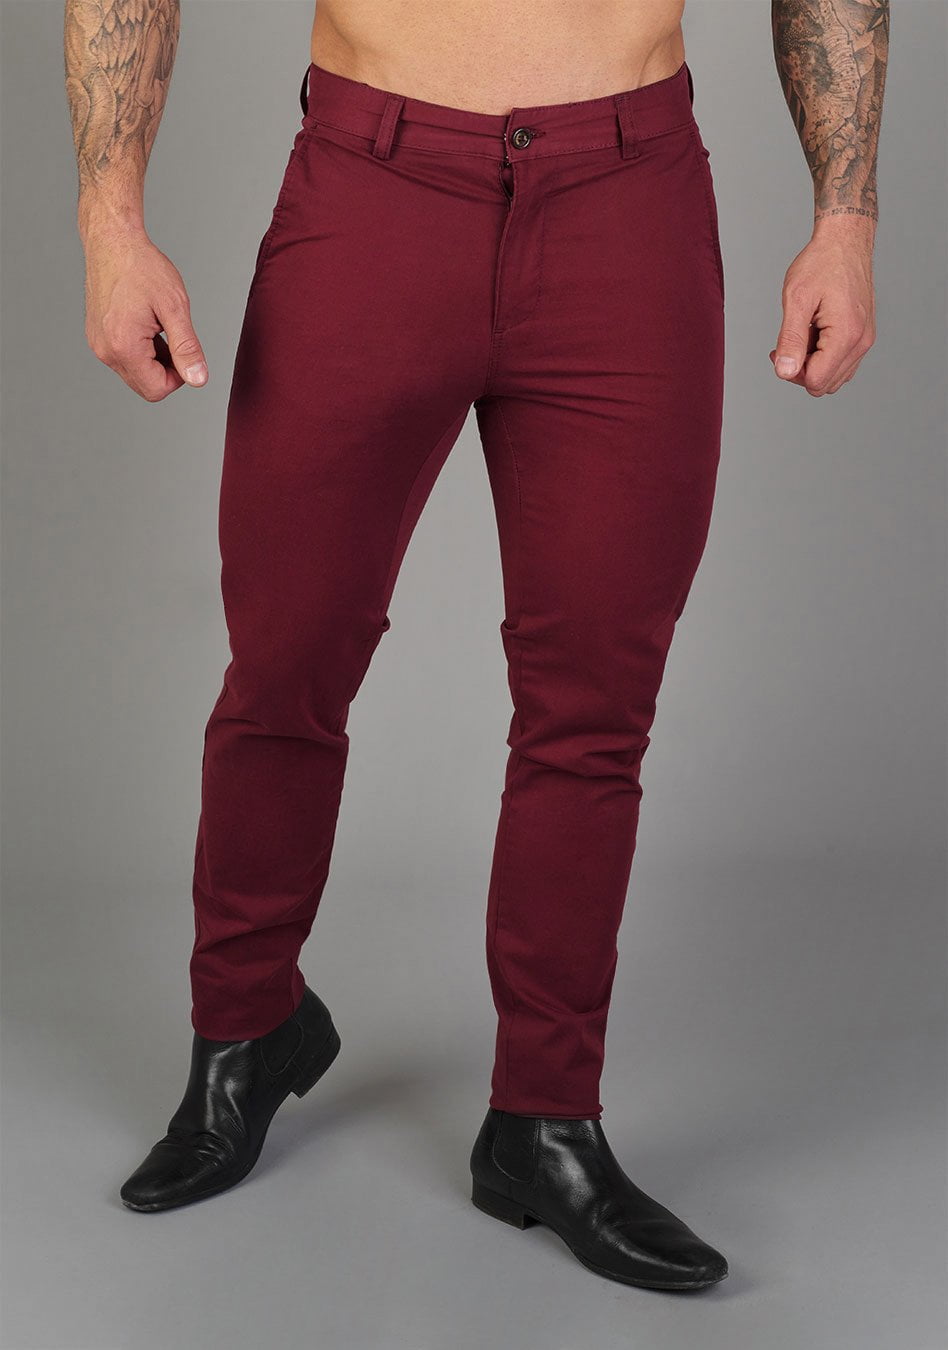 Fox Athletic-Fit Chinos - 68.00 - Oxcloth - Bottoms muscle-fit for bodybuilders and athletes